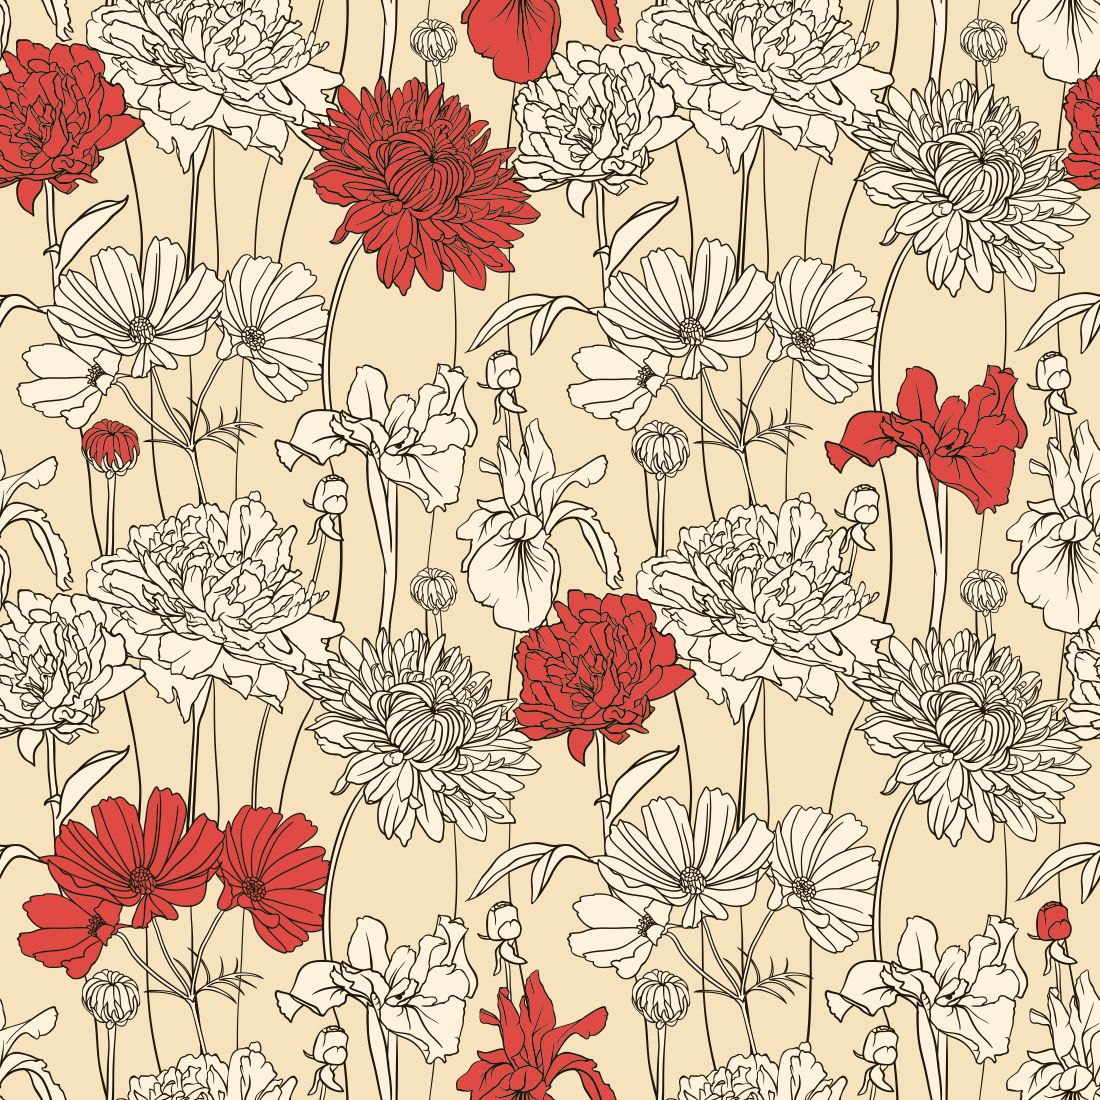 20 Plus Turkish Seamless Floral Patterns And Textures Preview Image.